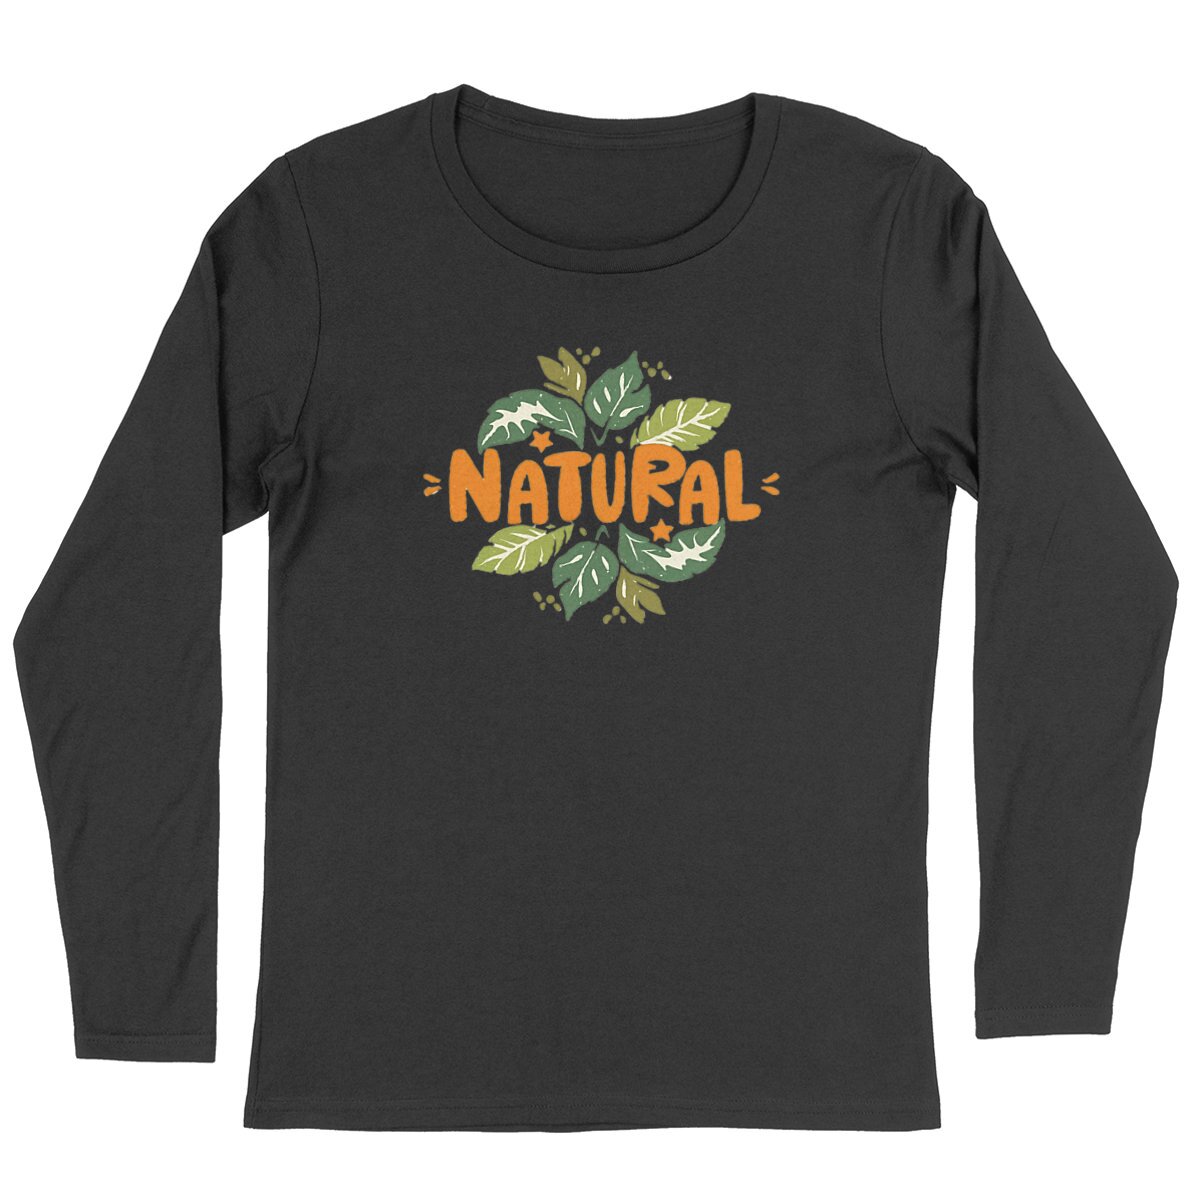 Natural Foilage Long Sleeve Organic Cotton Graphic Shirt | Hypoallergenic - Allergy Friendly - Naturally Free